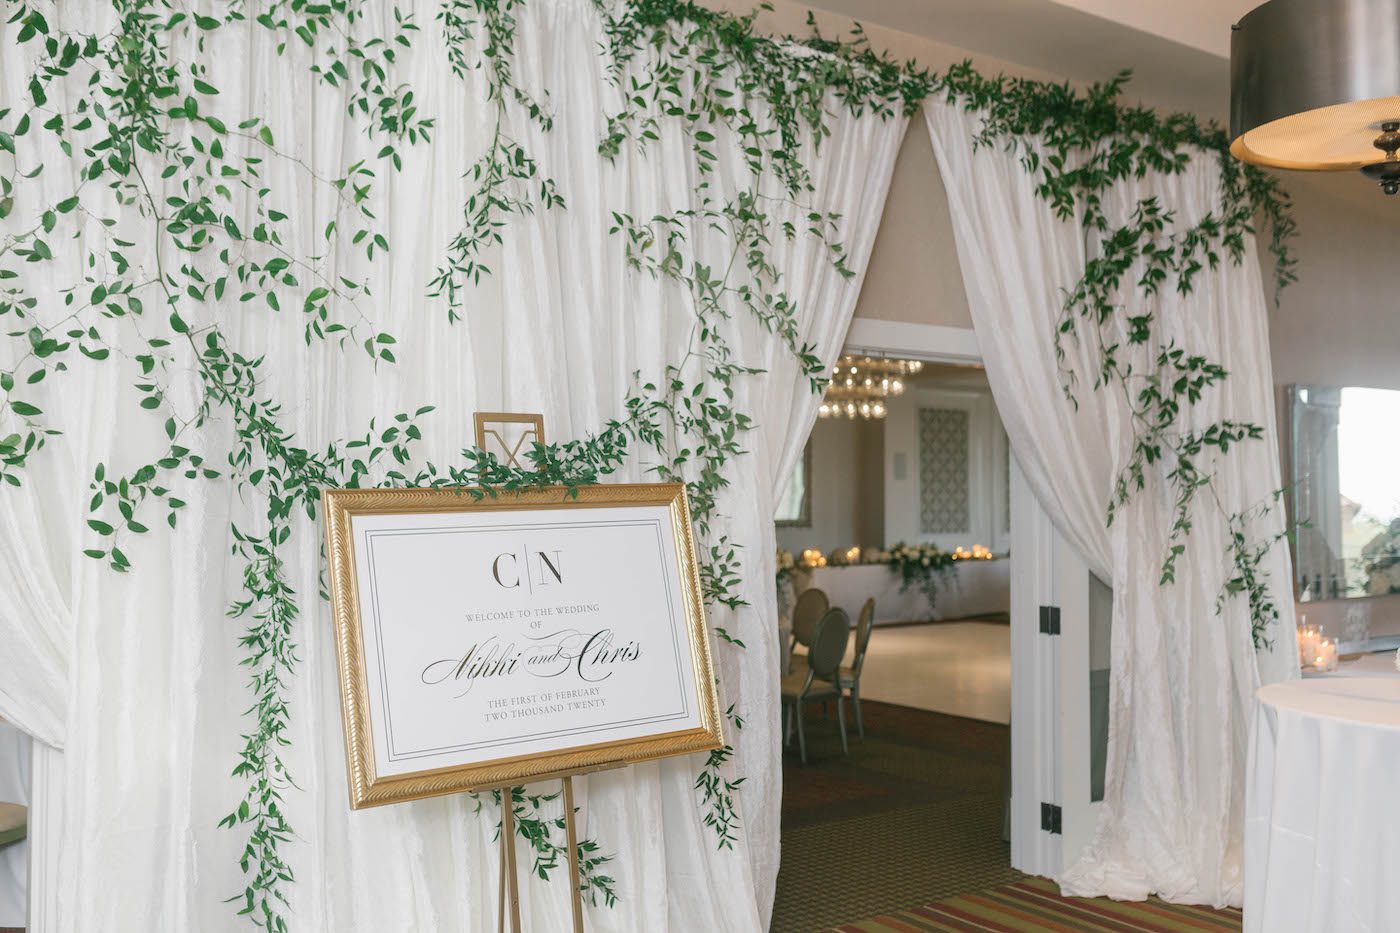 Elegant Wedding Reception Decor, Classic White Draping with Ivy Floral Accents and Greenery, Timeless White and Gold Welcome Sign with Modern Monogram | Tampa Bay Wedding Planner Parties A'La Carte | Florida Boutique Hotel Wedding Venue The Birchwood | Downtown St. Petersburg Wedding Florist Bruce Wayne Florals